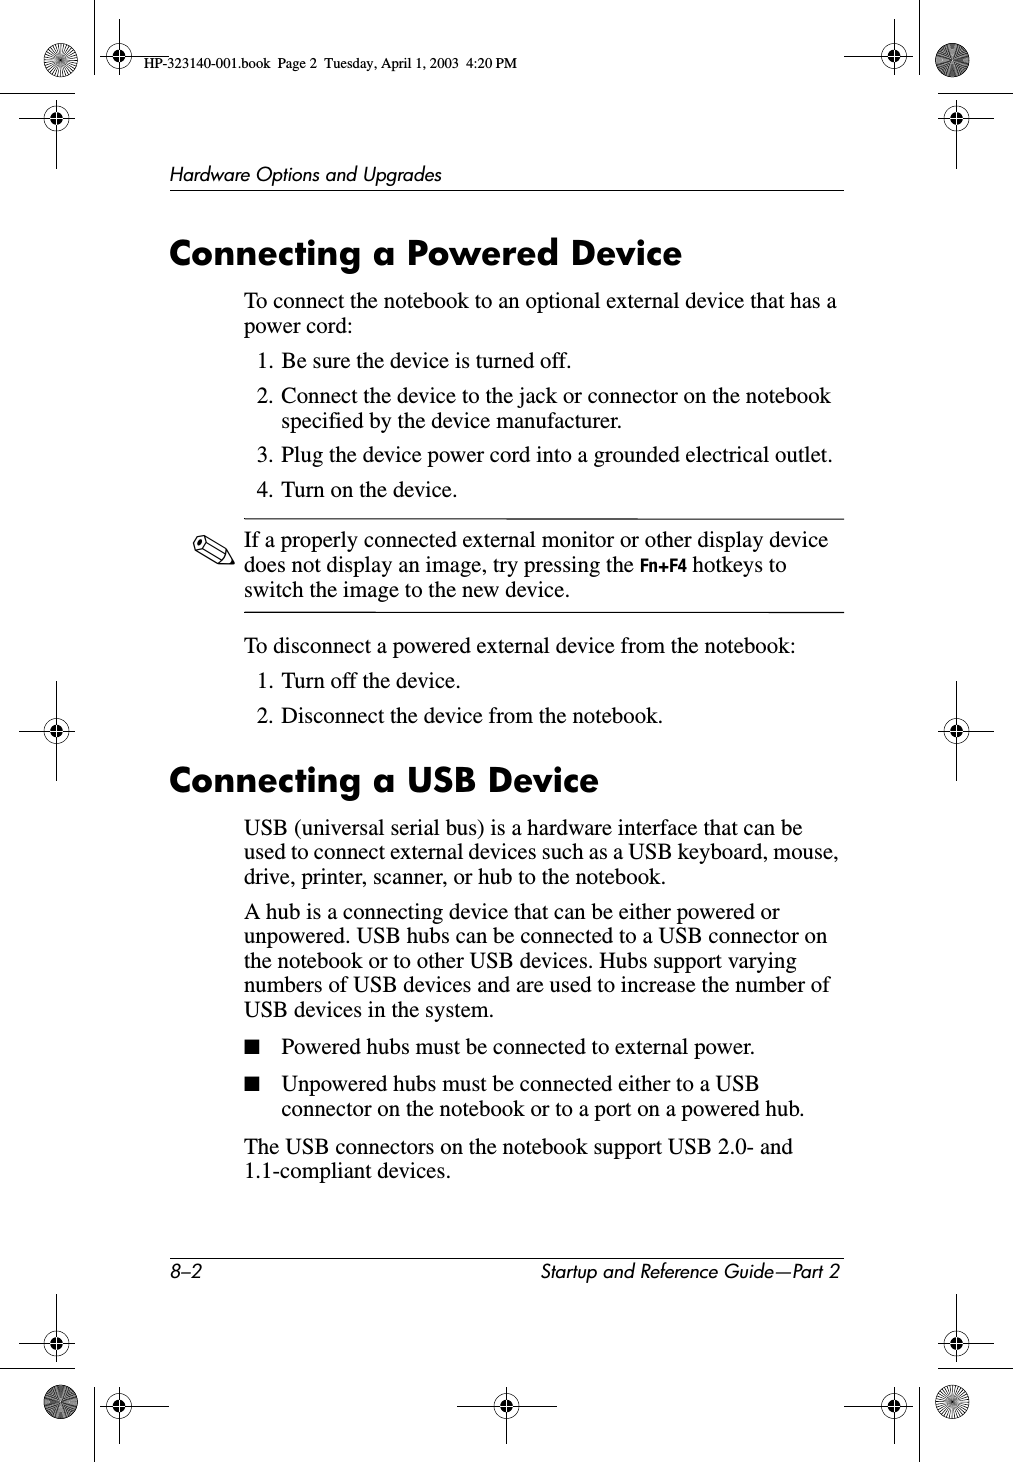 8–2 Startup and Reference Guide—Part 2Hardware Options and UpgradesConnecting a Powered DeviceTo connect the notebook to an optional external device that has a power cord:1. Be sure the device is turned off.2. Connect the device to the jack or connector on the notebook specified by the device manufacturer.3. Plug the device power cord into a grounded electrical outlet.4. Turn on the device.✎If a properly connected external monitor or other display device does not display an image, try pressing the Fn+F4 hotkeys to switch the image to the new device.To disconnect a powered external device from the notebook:1. Turn off the device.2. Disconnect the device from the notebook.Connecting a USB DeviceUSB (universal serial bus) is a hardware interface that can be used to connect external devices such as a USB keyboard, mouse, drive, printer, scanner, or hub to the notebook. A hub is a connecting device that can be either powered or unpowered. USB hubs can be connected to a USB connector on the notebook or to other USB devices. Hubs support varying numbers of USB devices and are used to increase the number of USB devices in the system.■Powered hubs must be connected to external power.■Unpowered hubs must be connected either to a USB connector on the notebook or to a port on a powered hub.The USB connectors on the notebook support USB 2.0- and 1.1-compliant devices.HP-323140-001.book  Page 2  Tuesday, April 1, 2003  4:20 PM